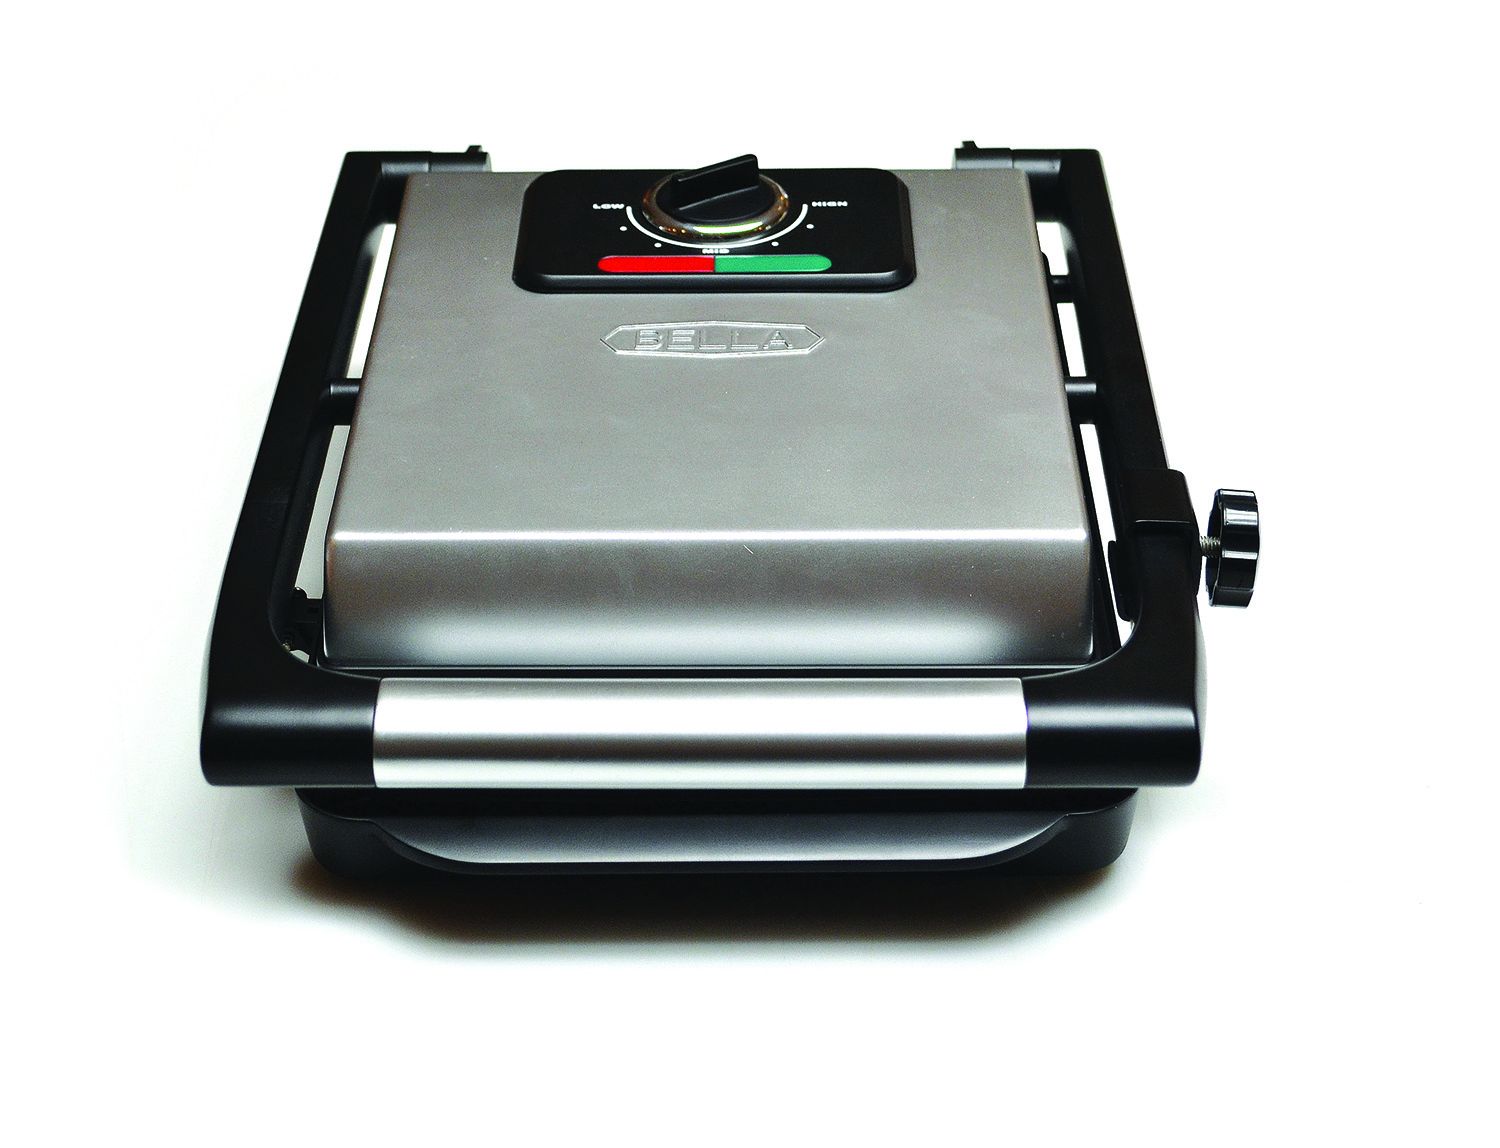 Panini Maker - Polished Stainless Steel